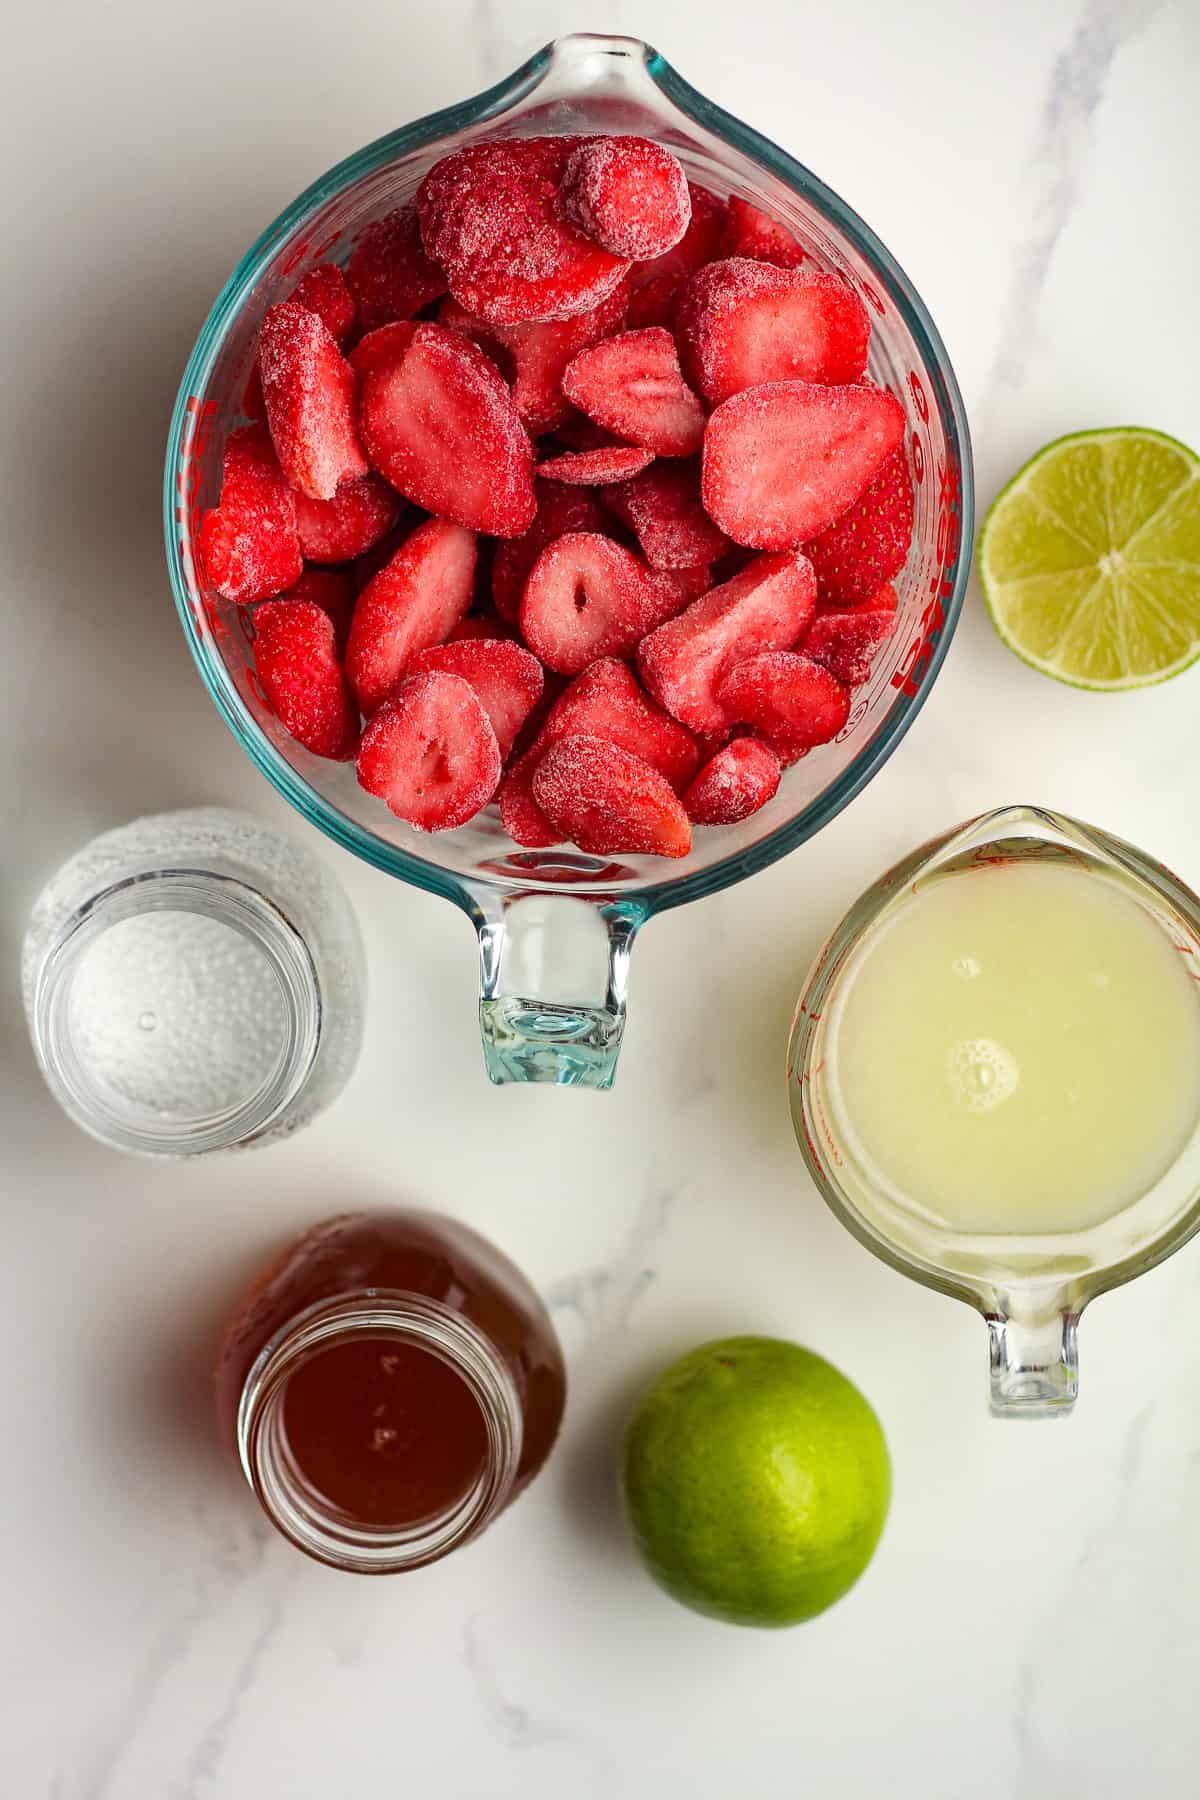 The ingredients for strawberry daiquiri mocktails.